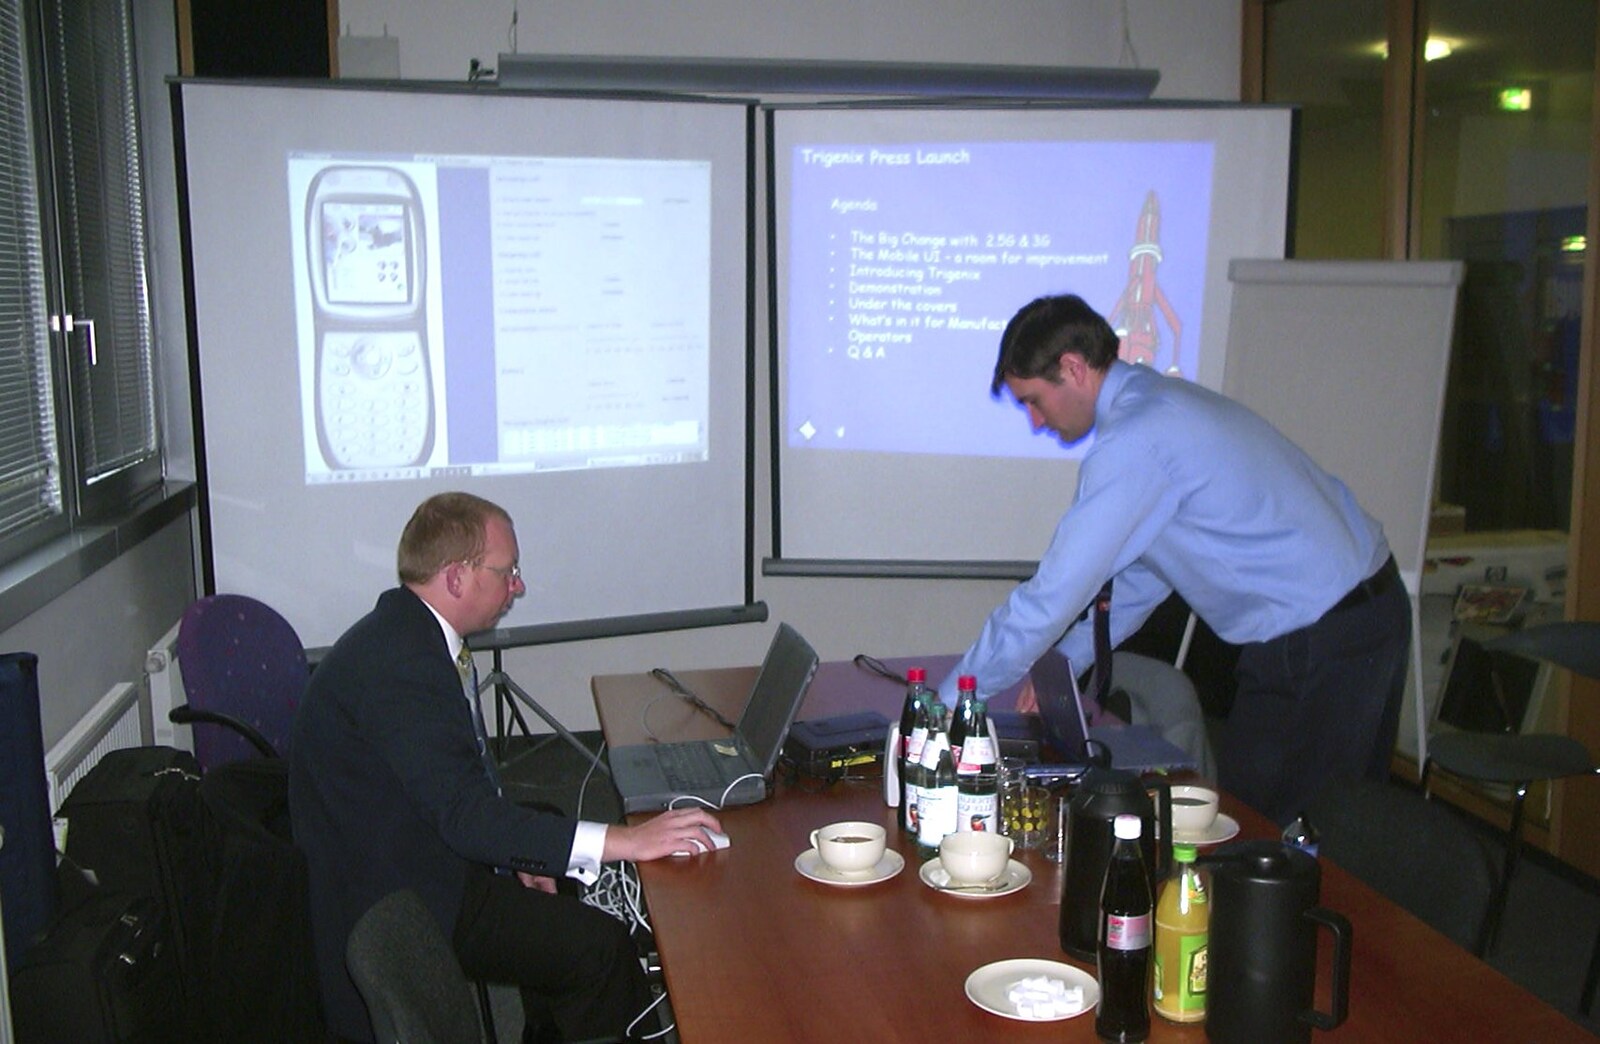 We set up for yet another presentation from The 3G Lab Press Tour: Munich, Germany - 14th March 2001